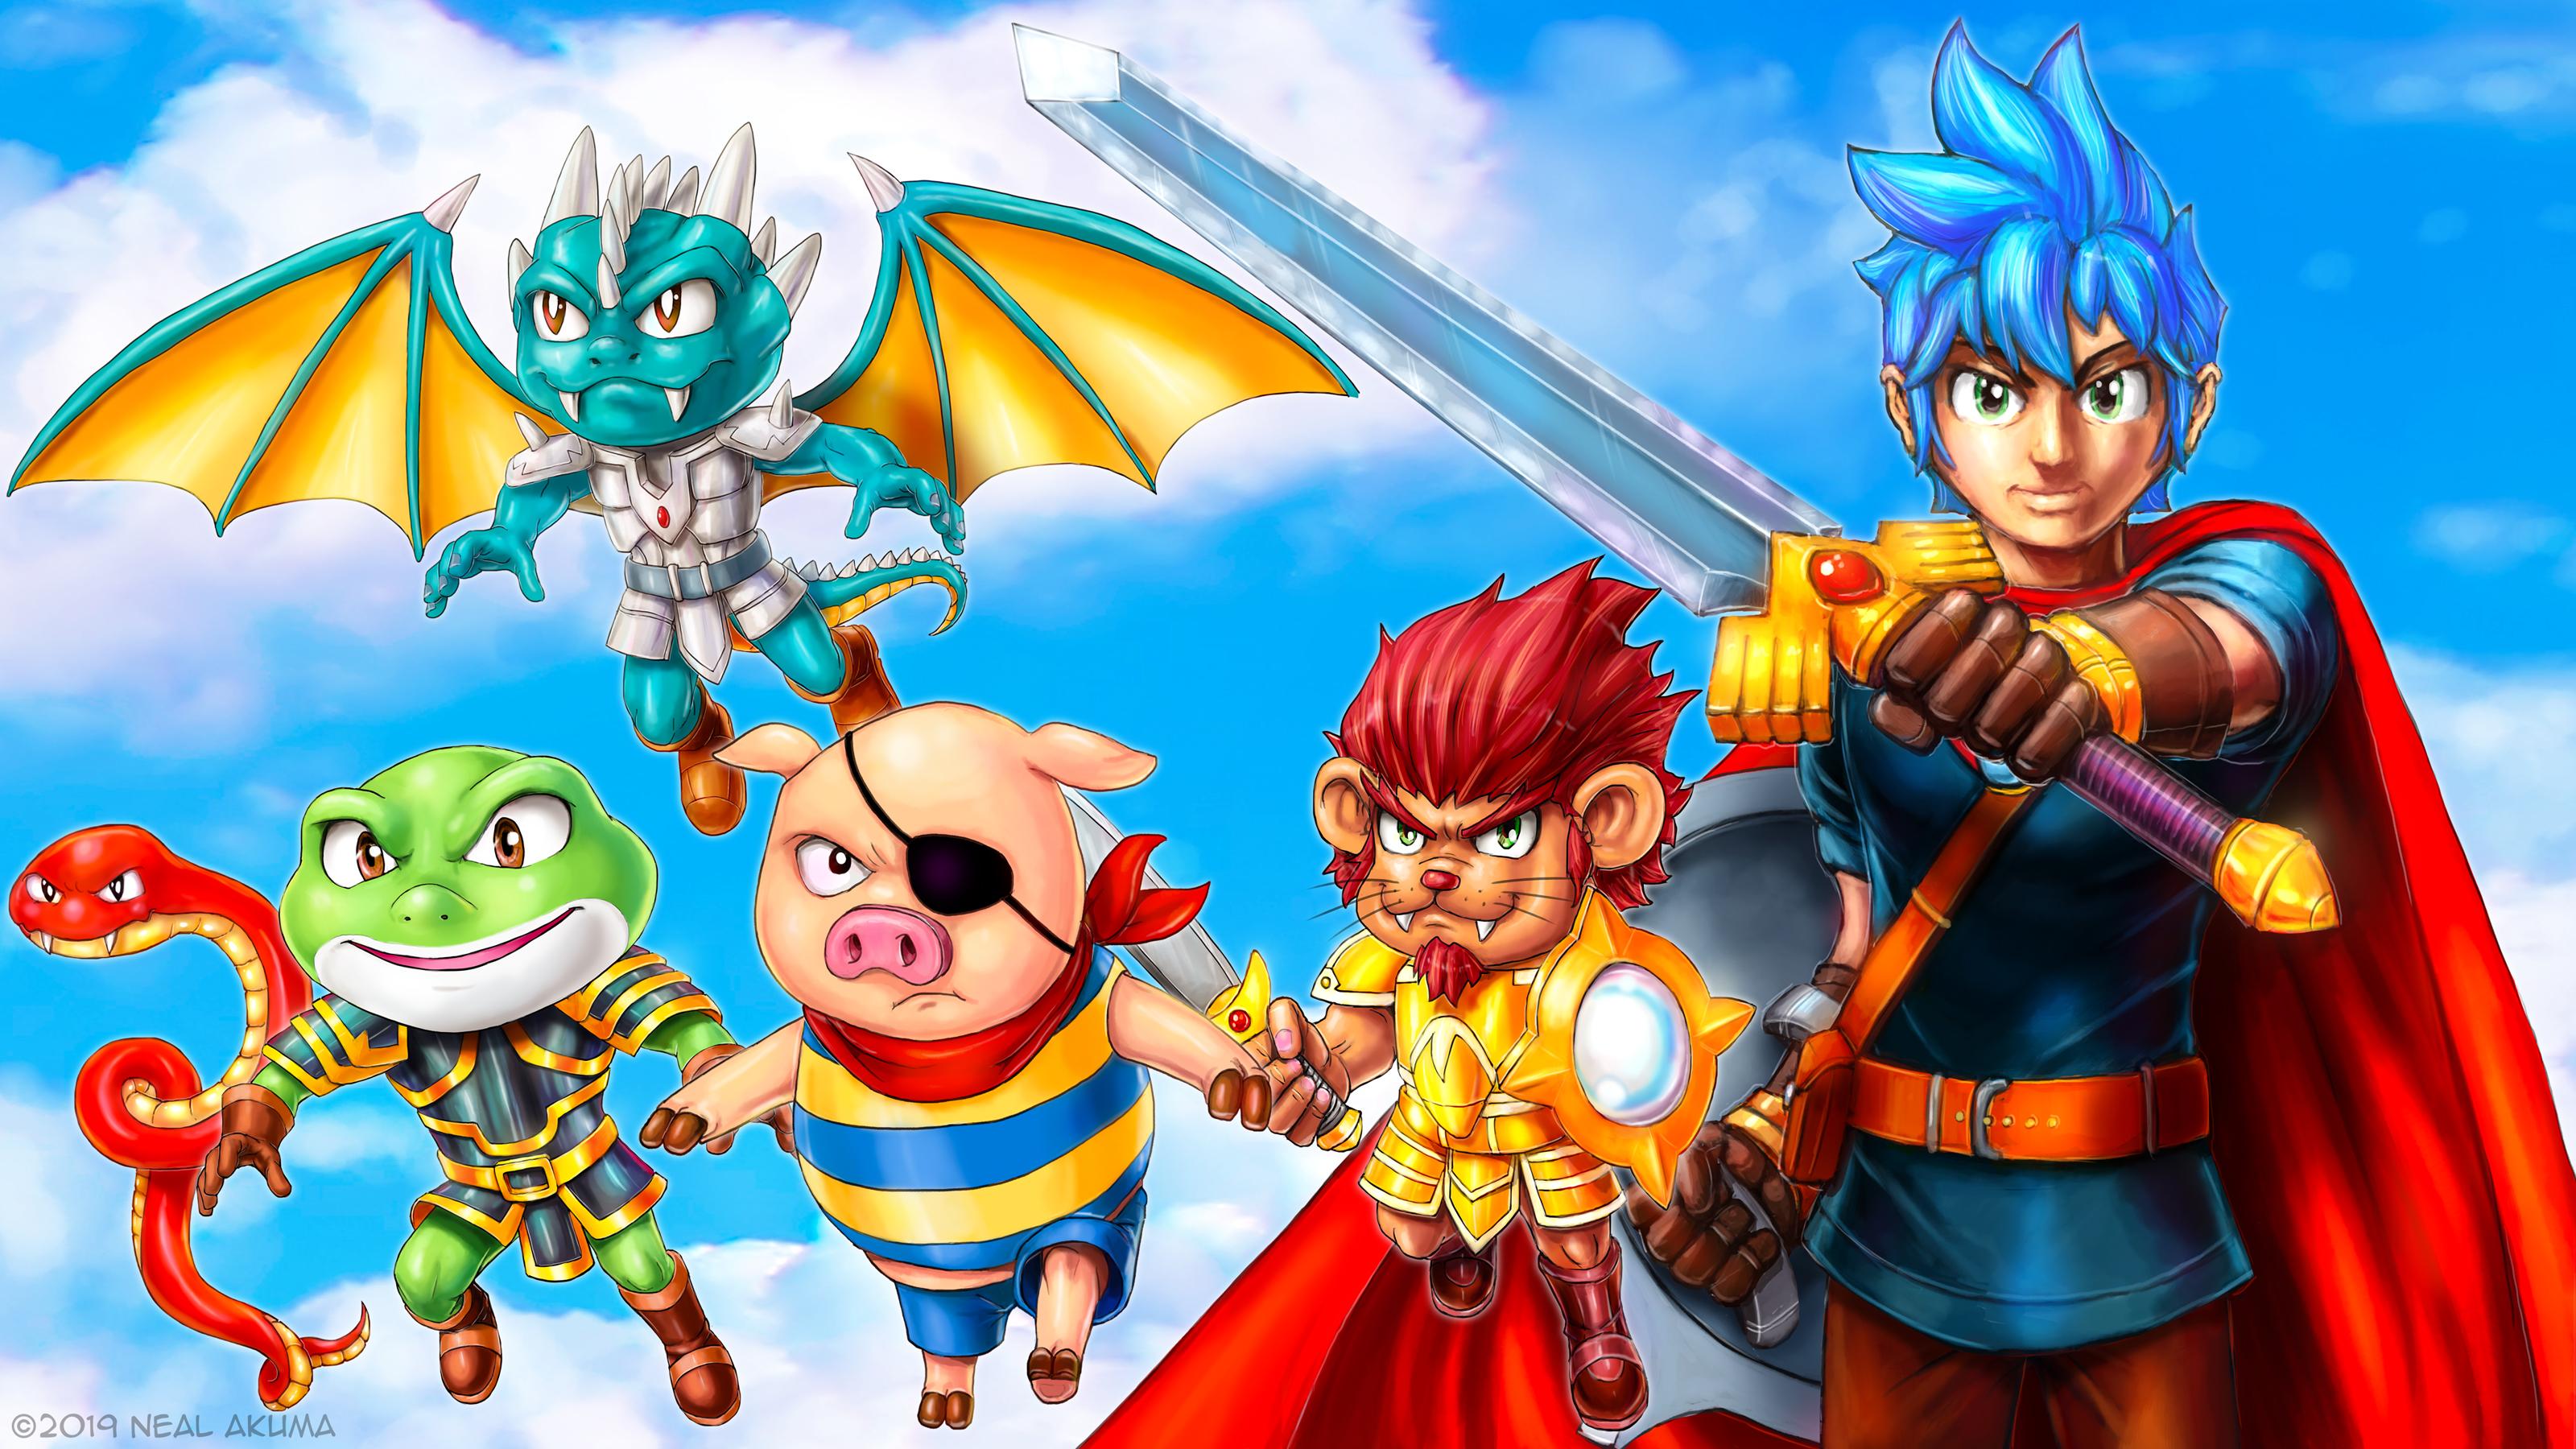 Monster Boy and the Cursed Kingdom